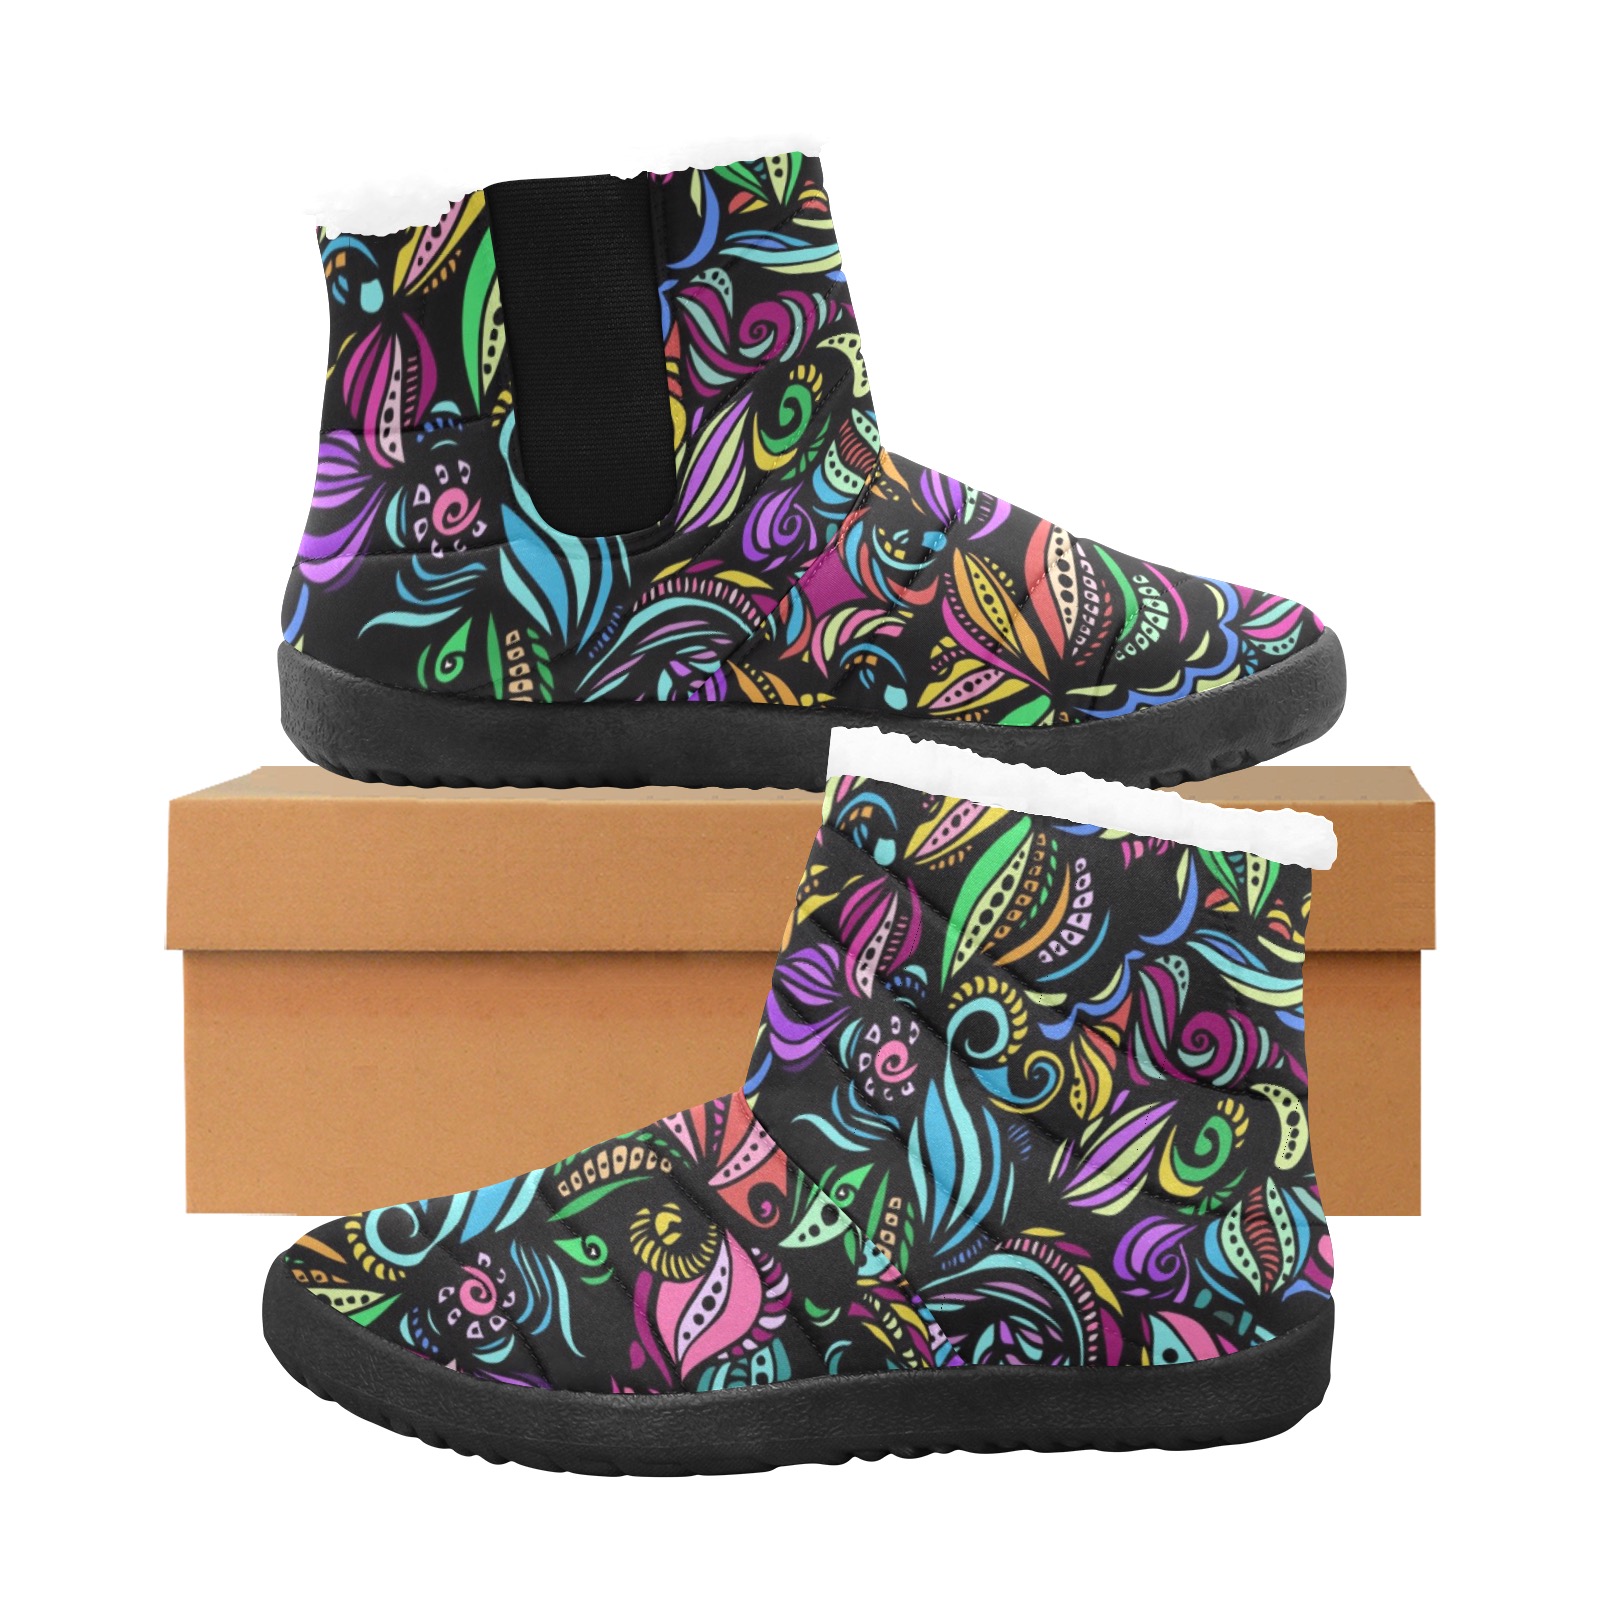 Whimsical Blooms Women's Cotton-Padded Shoes (Model 19291)